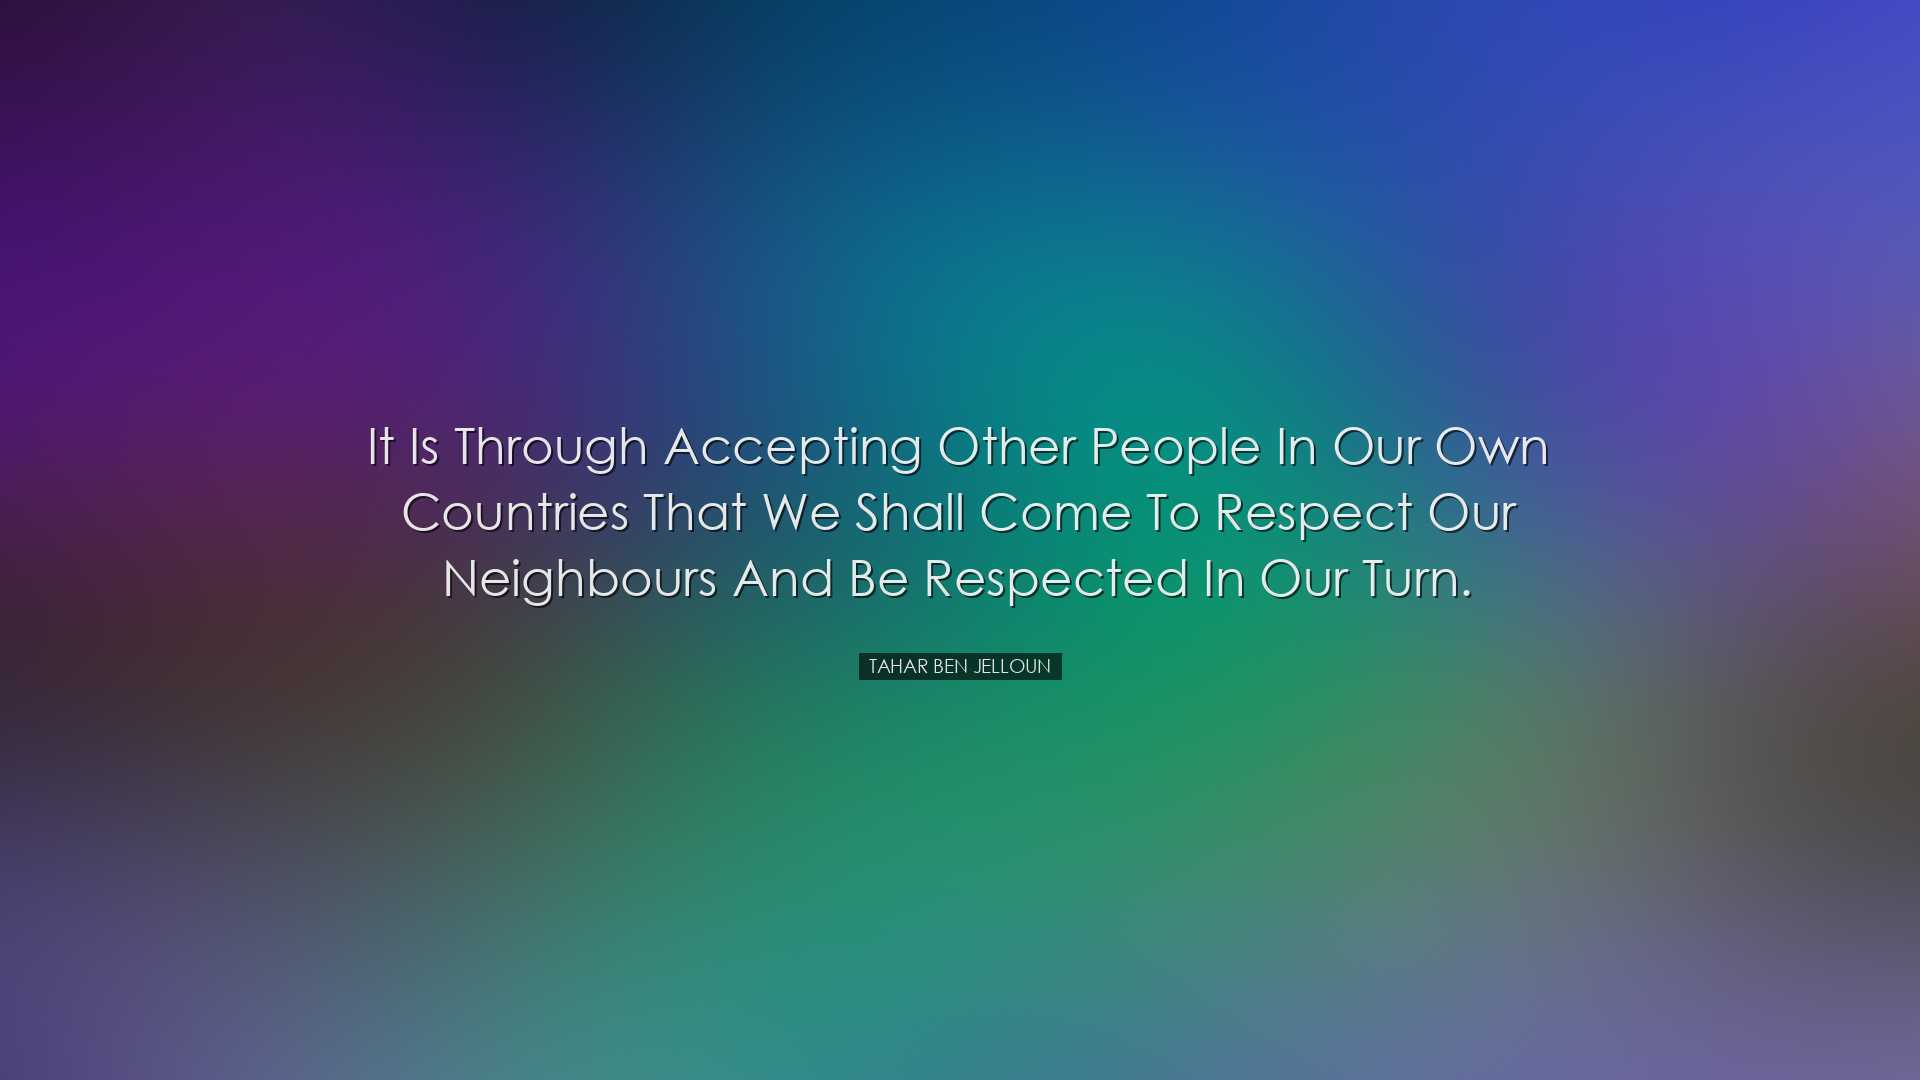 It is through accepting other people in our own countries that we